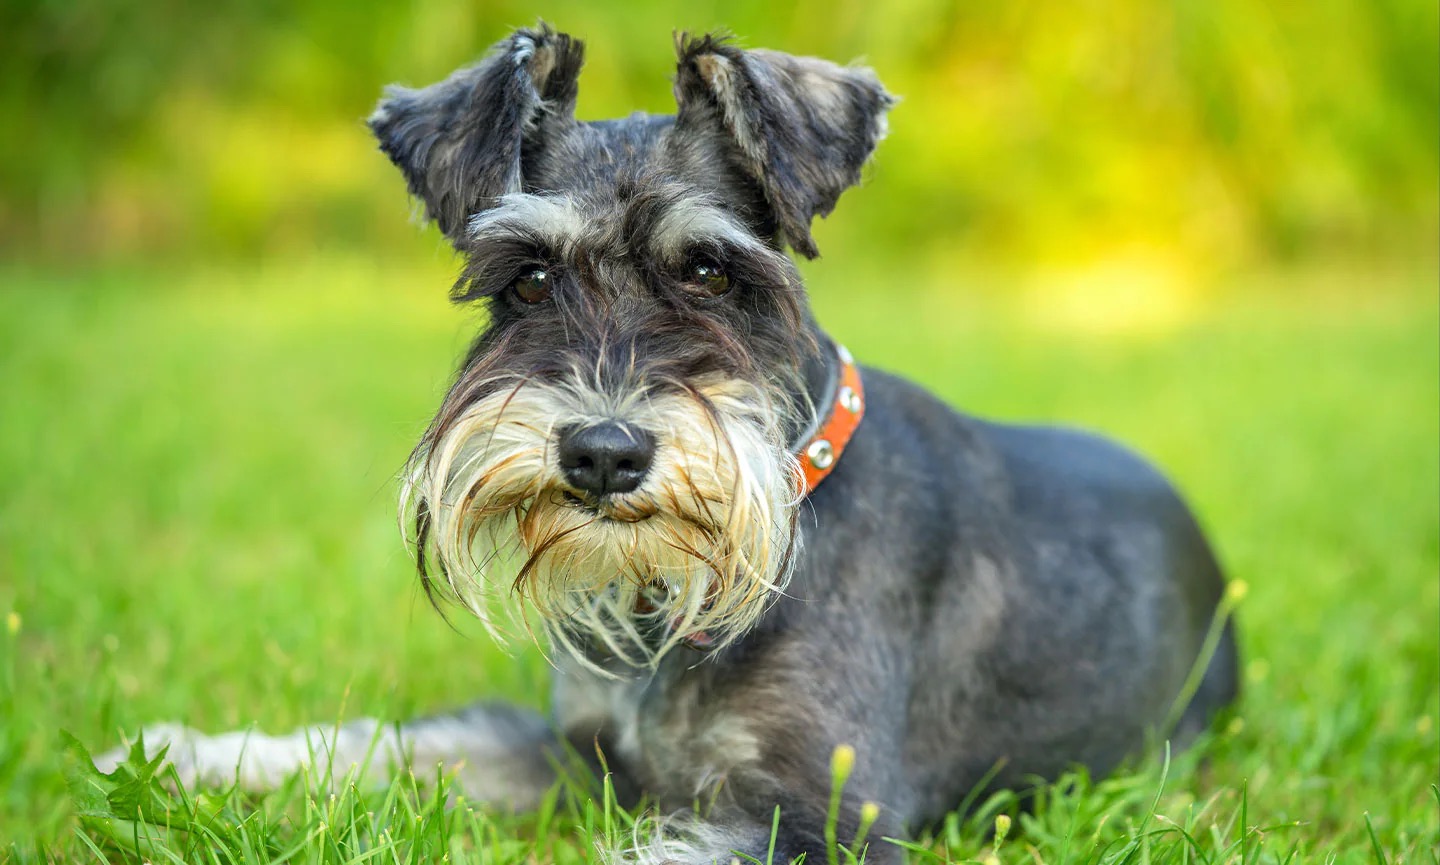 7 in 10 People Can’t Identity More Than 15 of These Dog Breeds 🐕 — Let’s See If You Can Do It Miniature Schnauzer